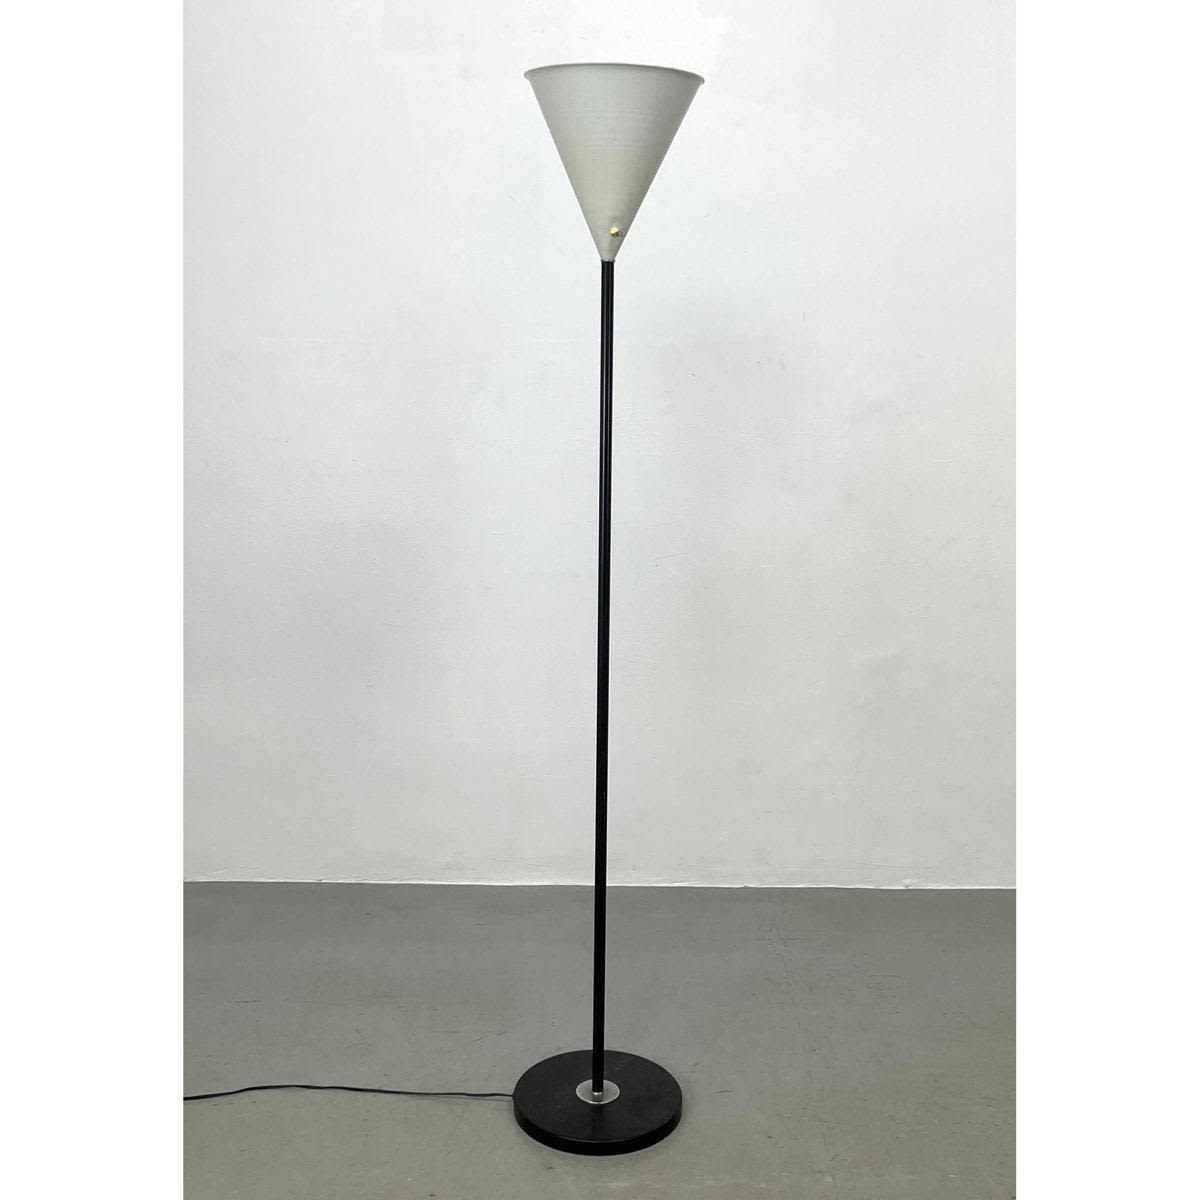 Cone Shade Torchiere Floor Lamp.